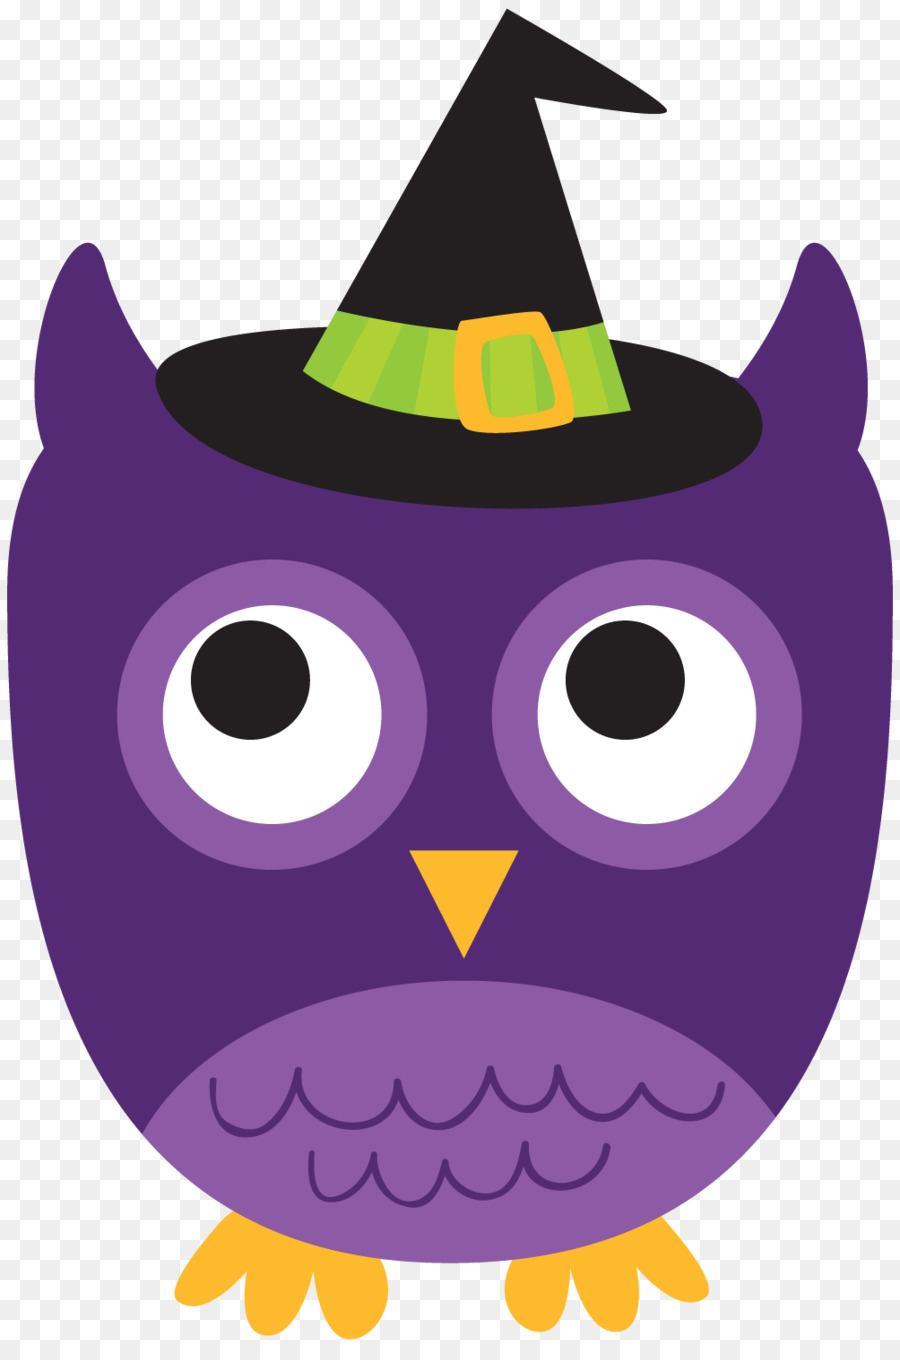 Chouette，Halloween PNG